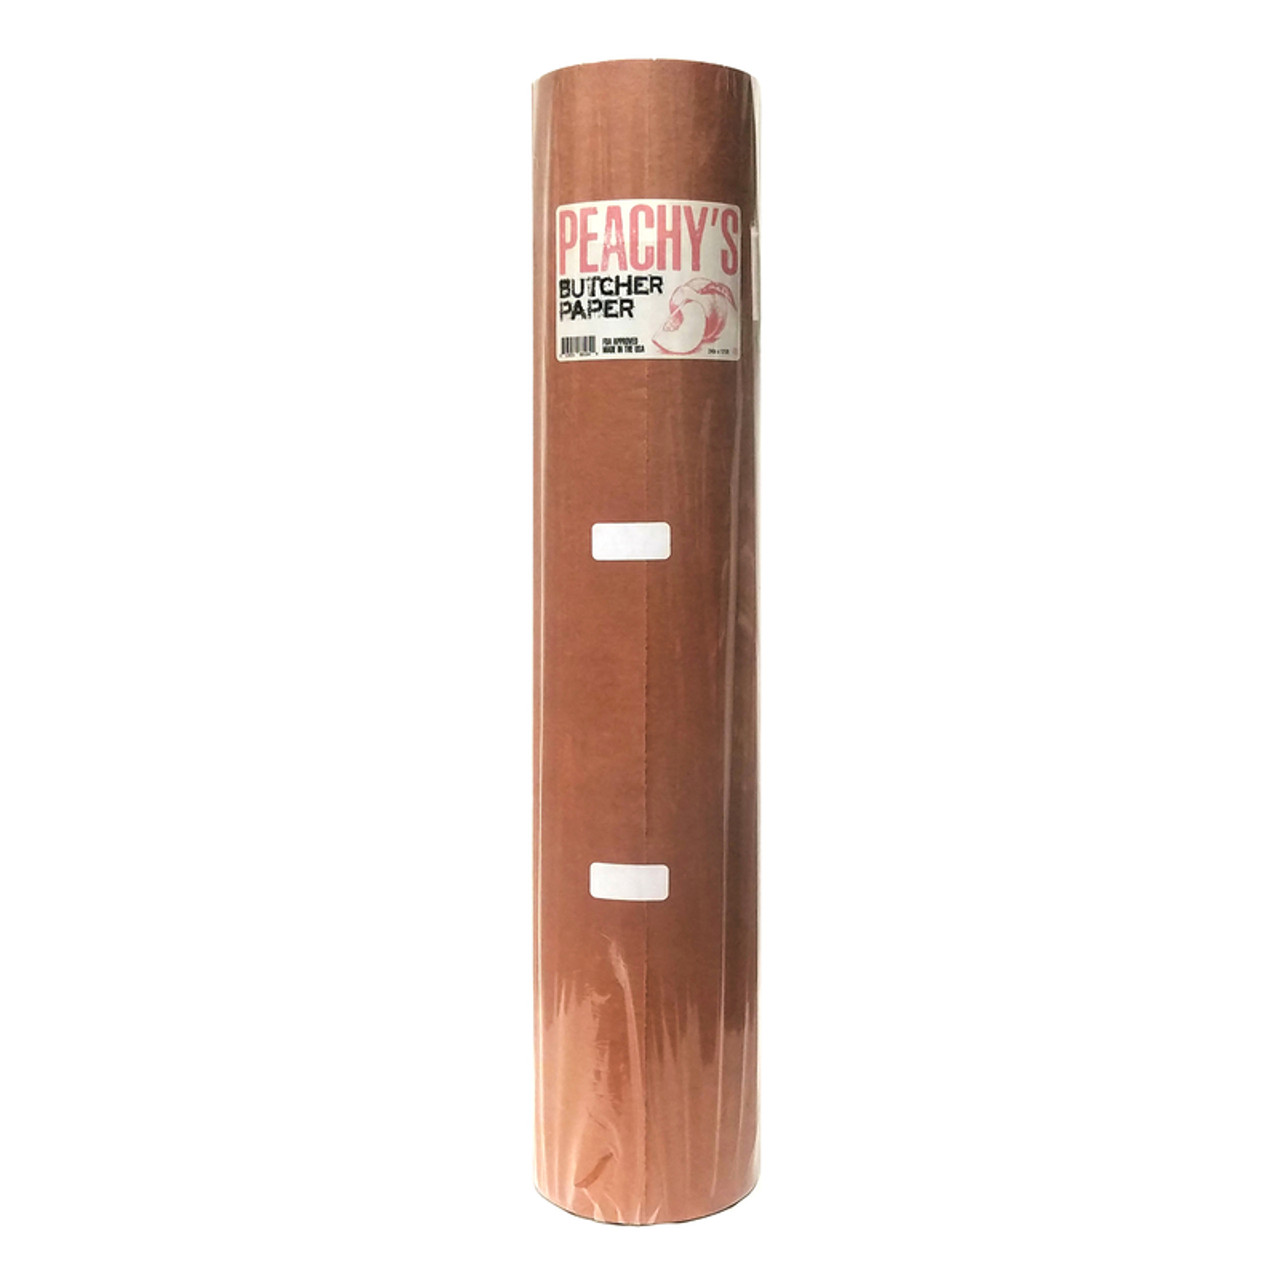  Pink Butcher Paper Roll With Dispenser Box - 17.25 Inch by 175  Foot Roll of Food Grade Peach BBQ Butcher Paper for Smoking Meat -  Unbleached, Unwaxed and Uncoated Kraft Paper